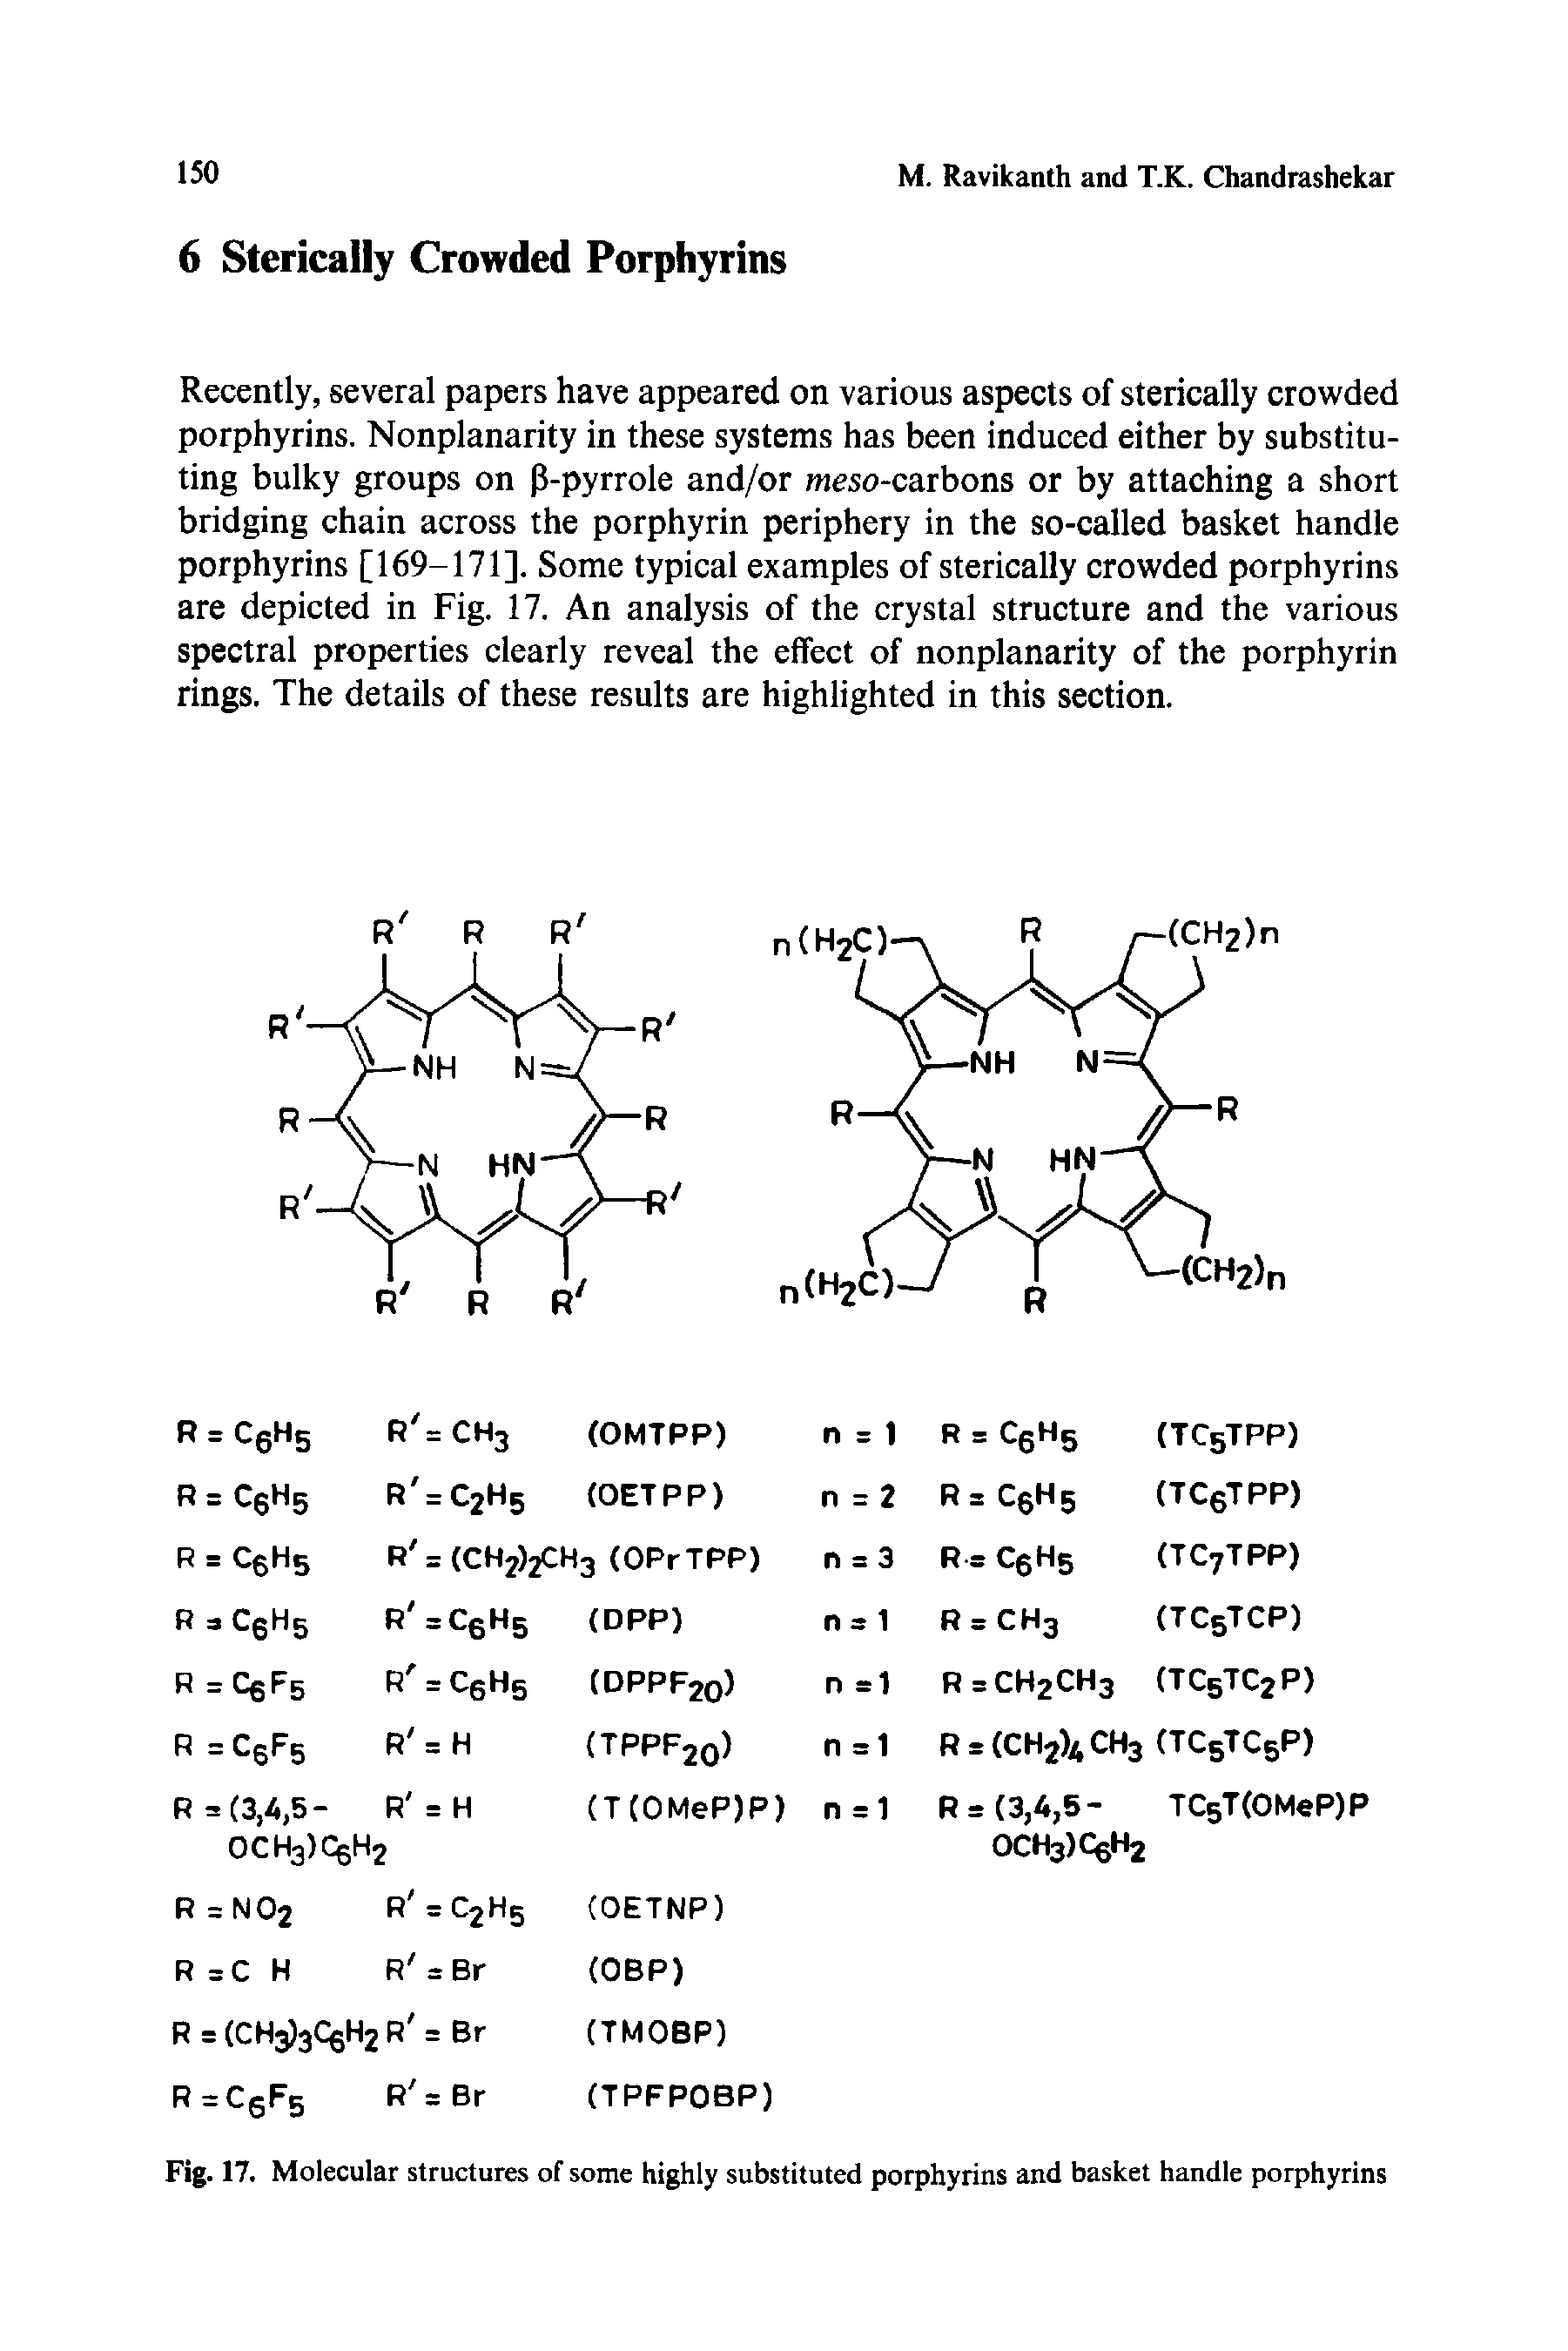 Fig. 17. Molecular structures of some highly substituted porphyrins and basket handle porphyrins...